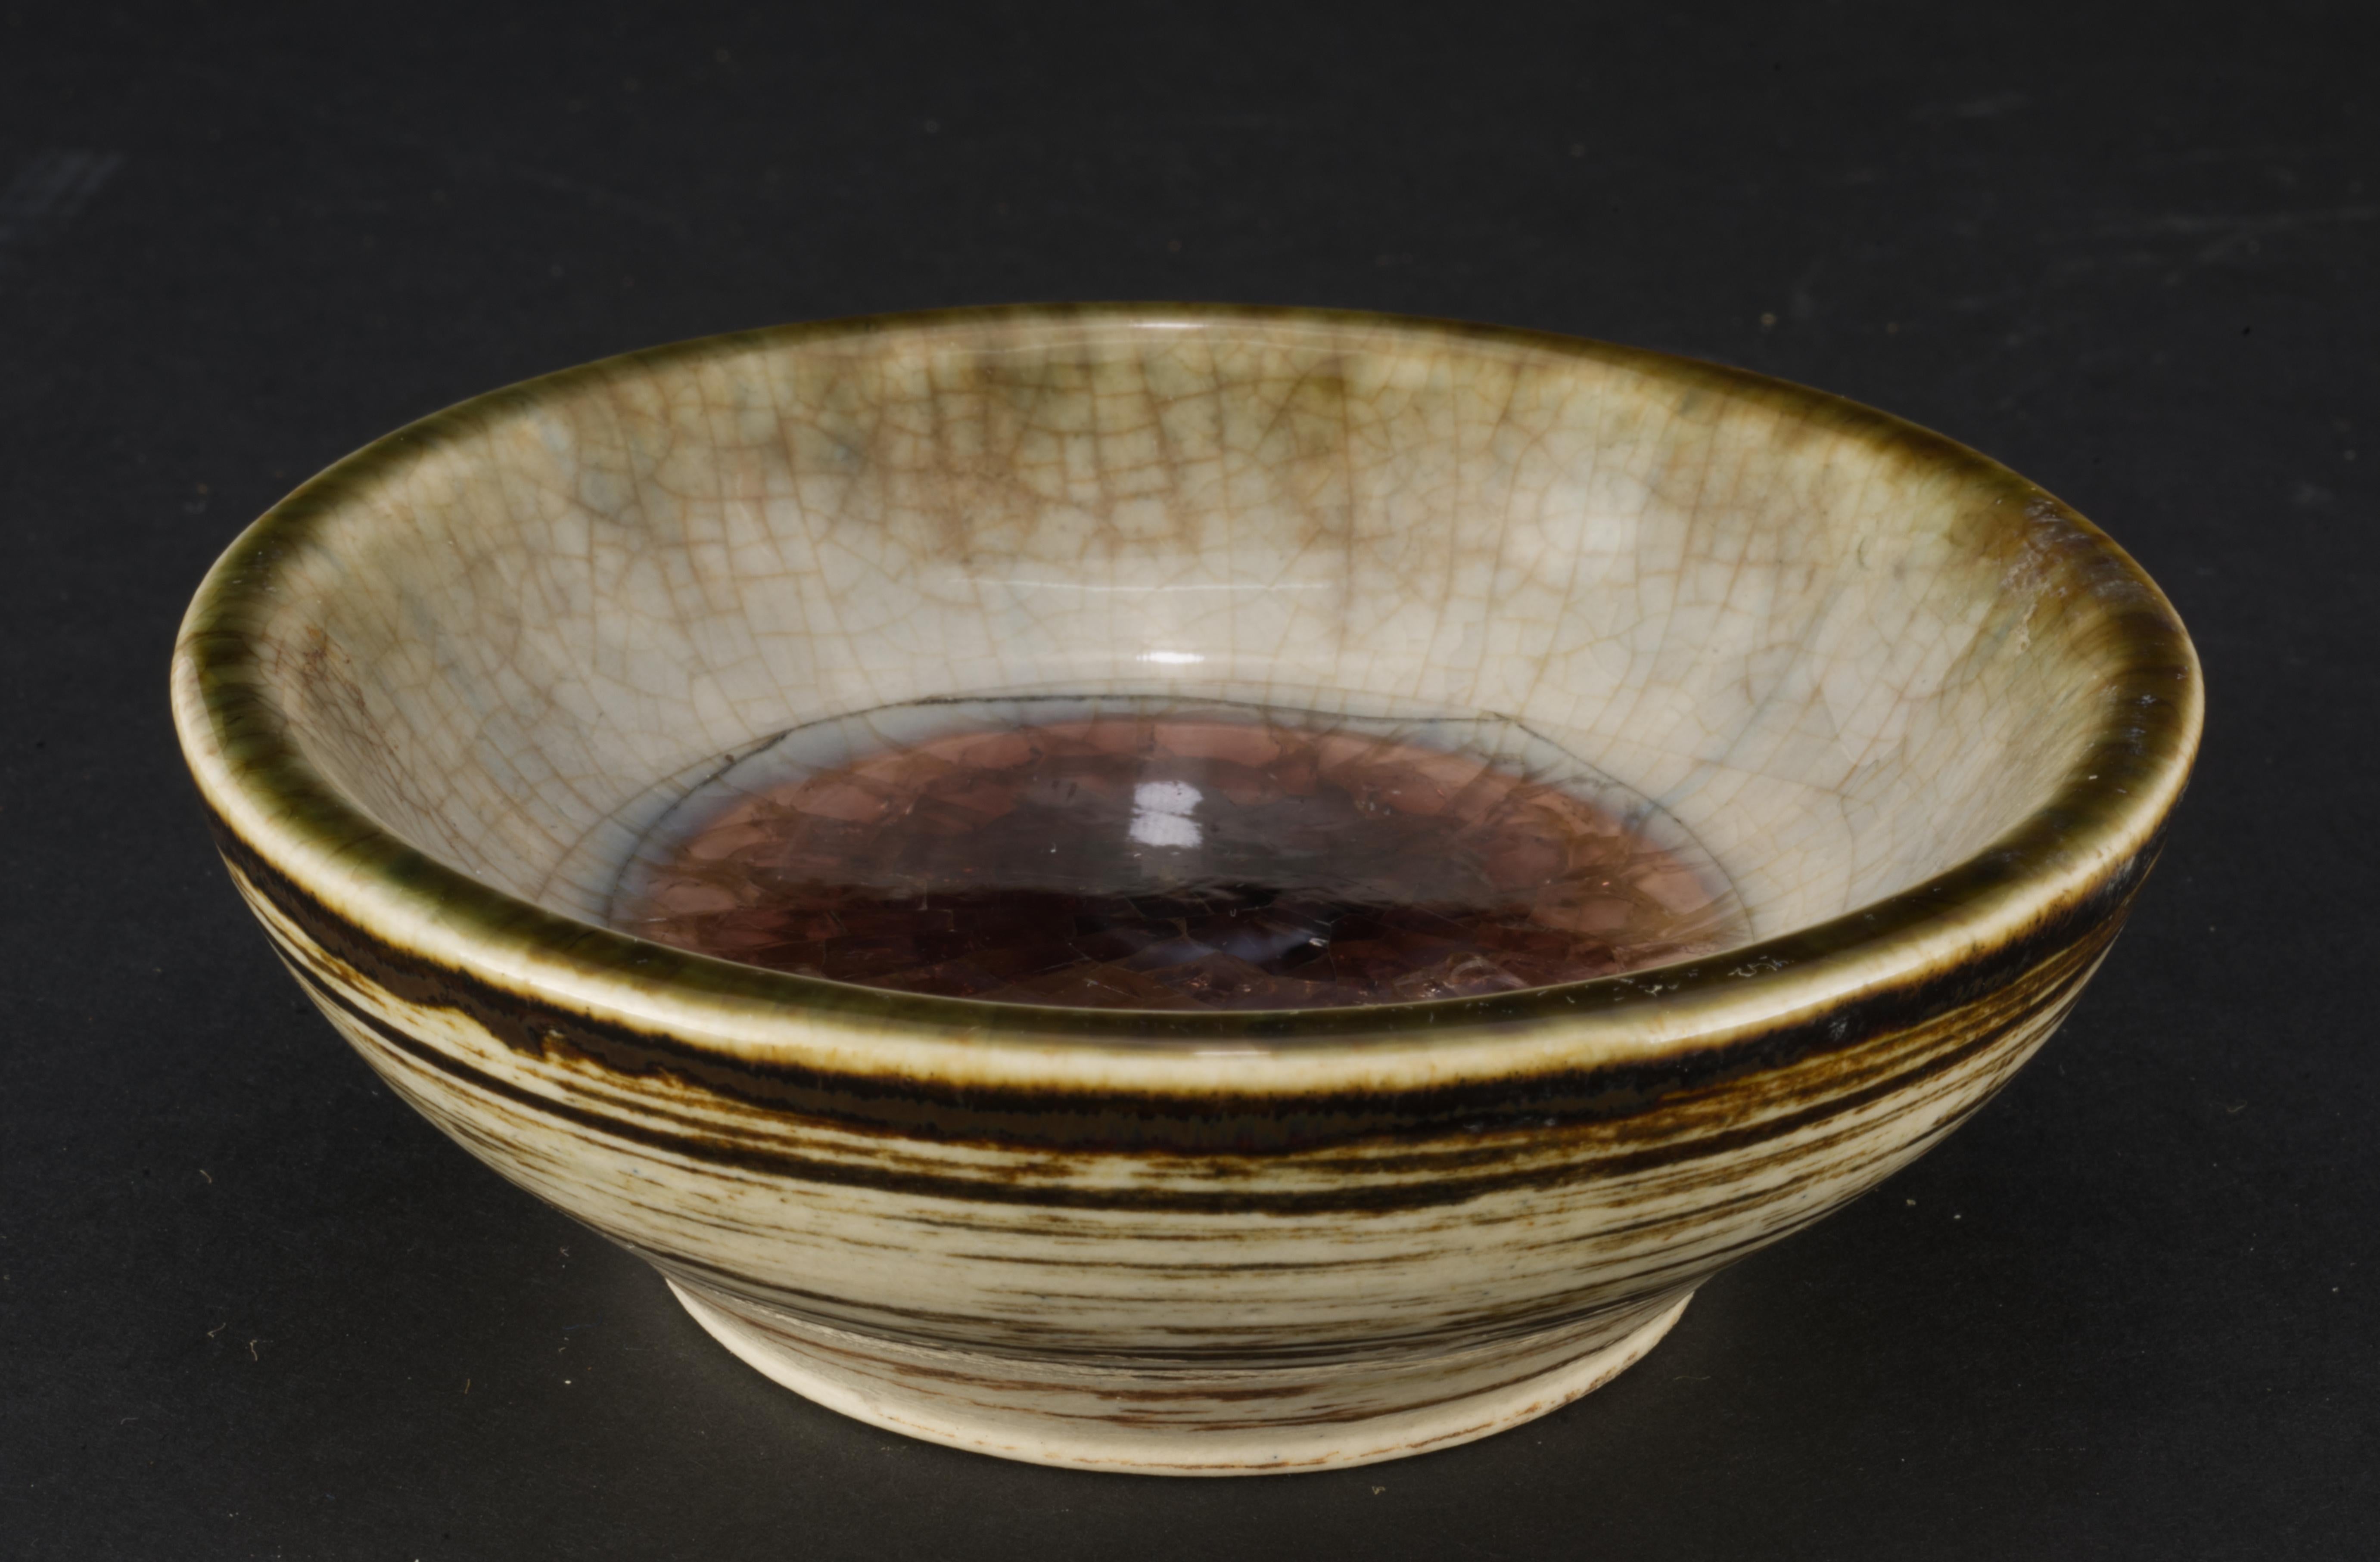  Waylande Gregory bowl was made for British luxury goods firm Alfred Dunhill in 1940s. Bowl was made in cream-colored clay with brown and transparent crackled glaze and tinted crackled glass inclusion in the center of the interior of the bowl, and